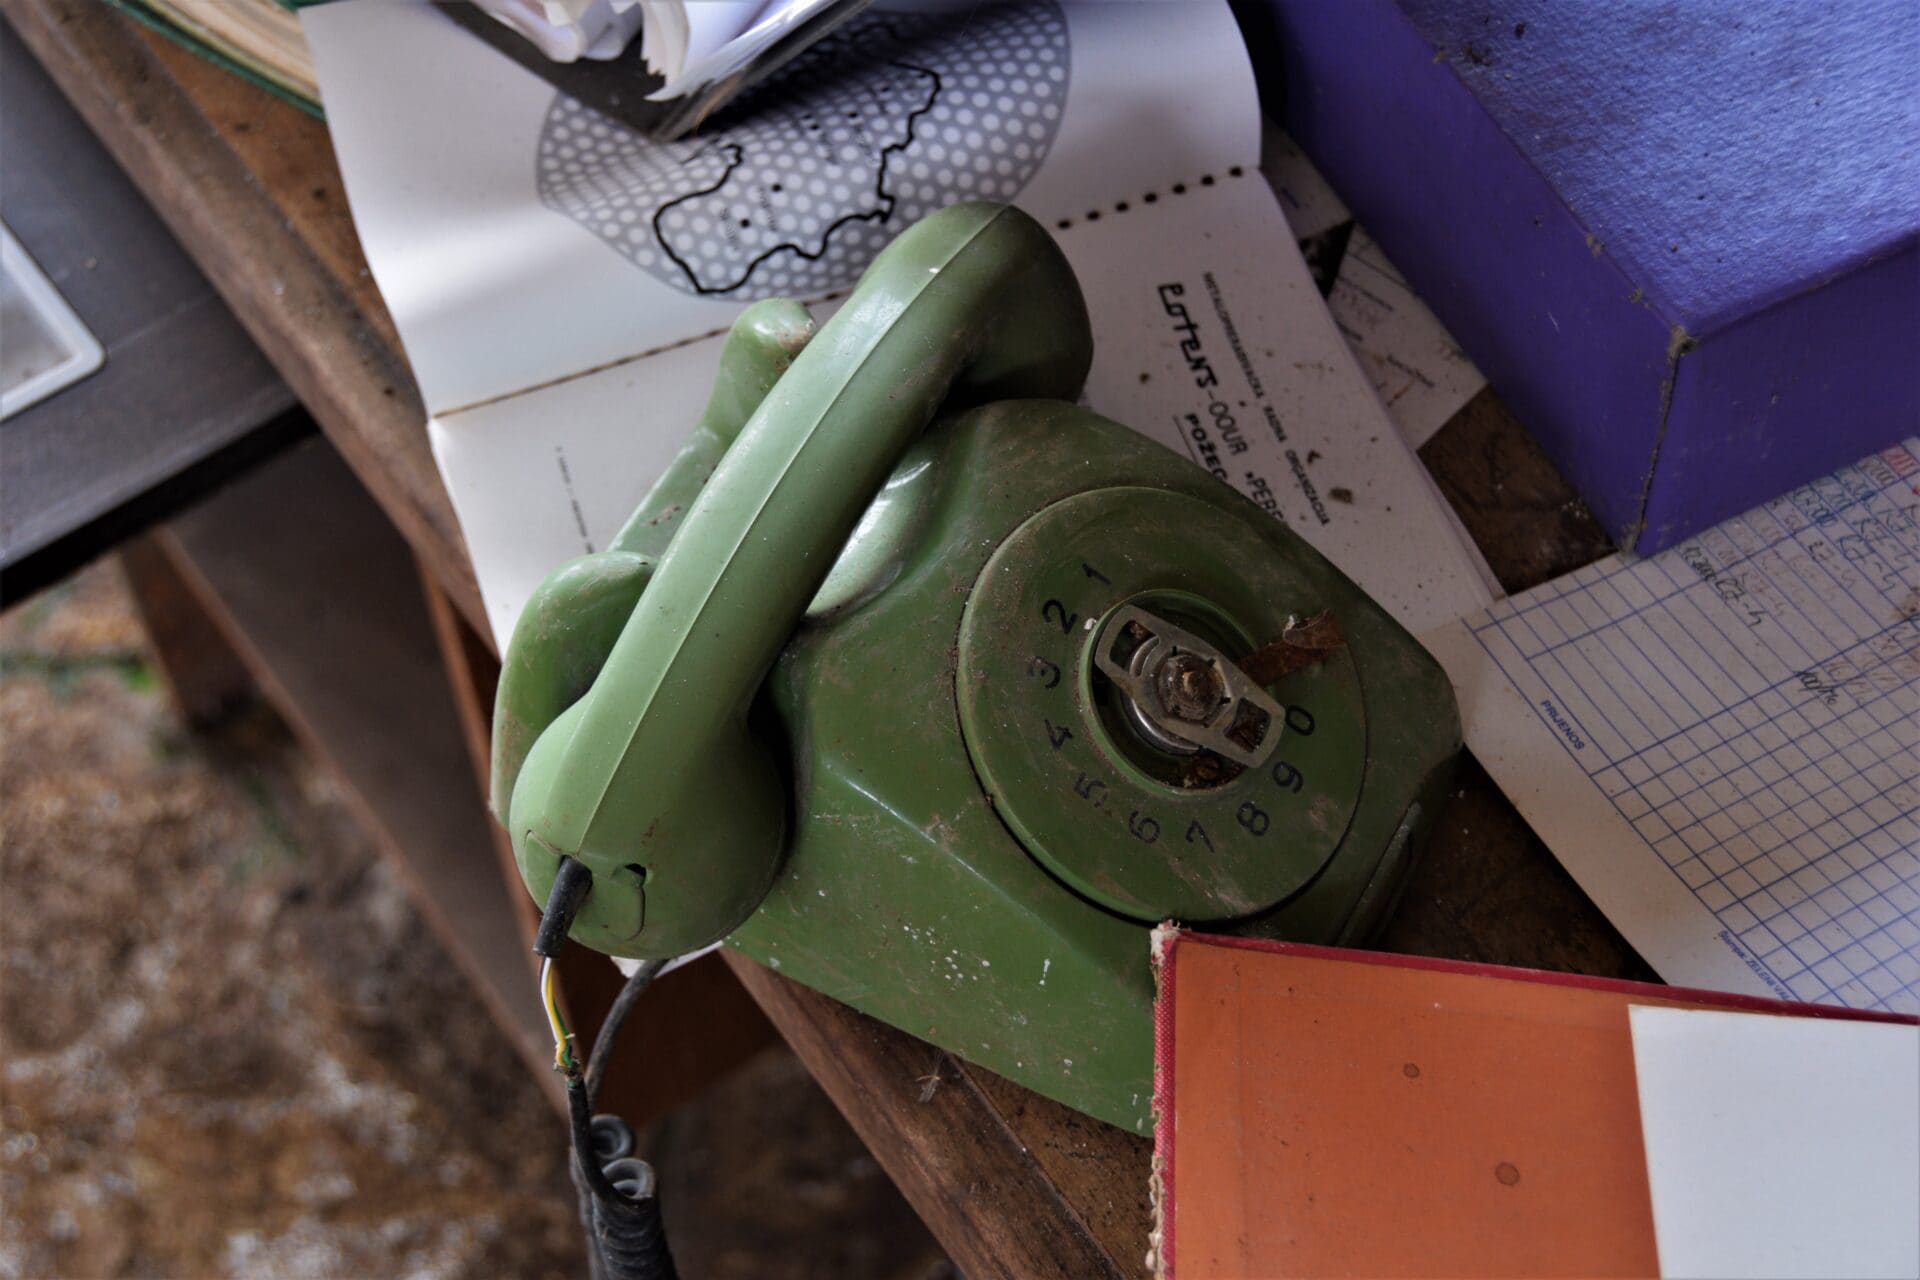 a green corded telephone on a wooden table